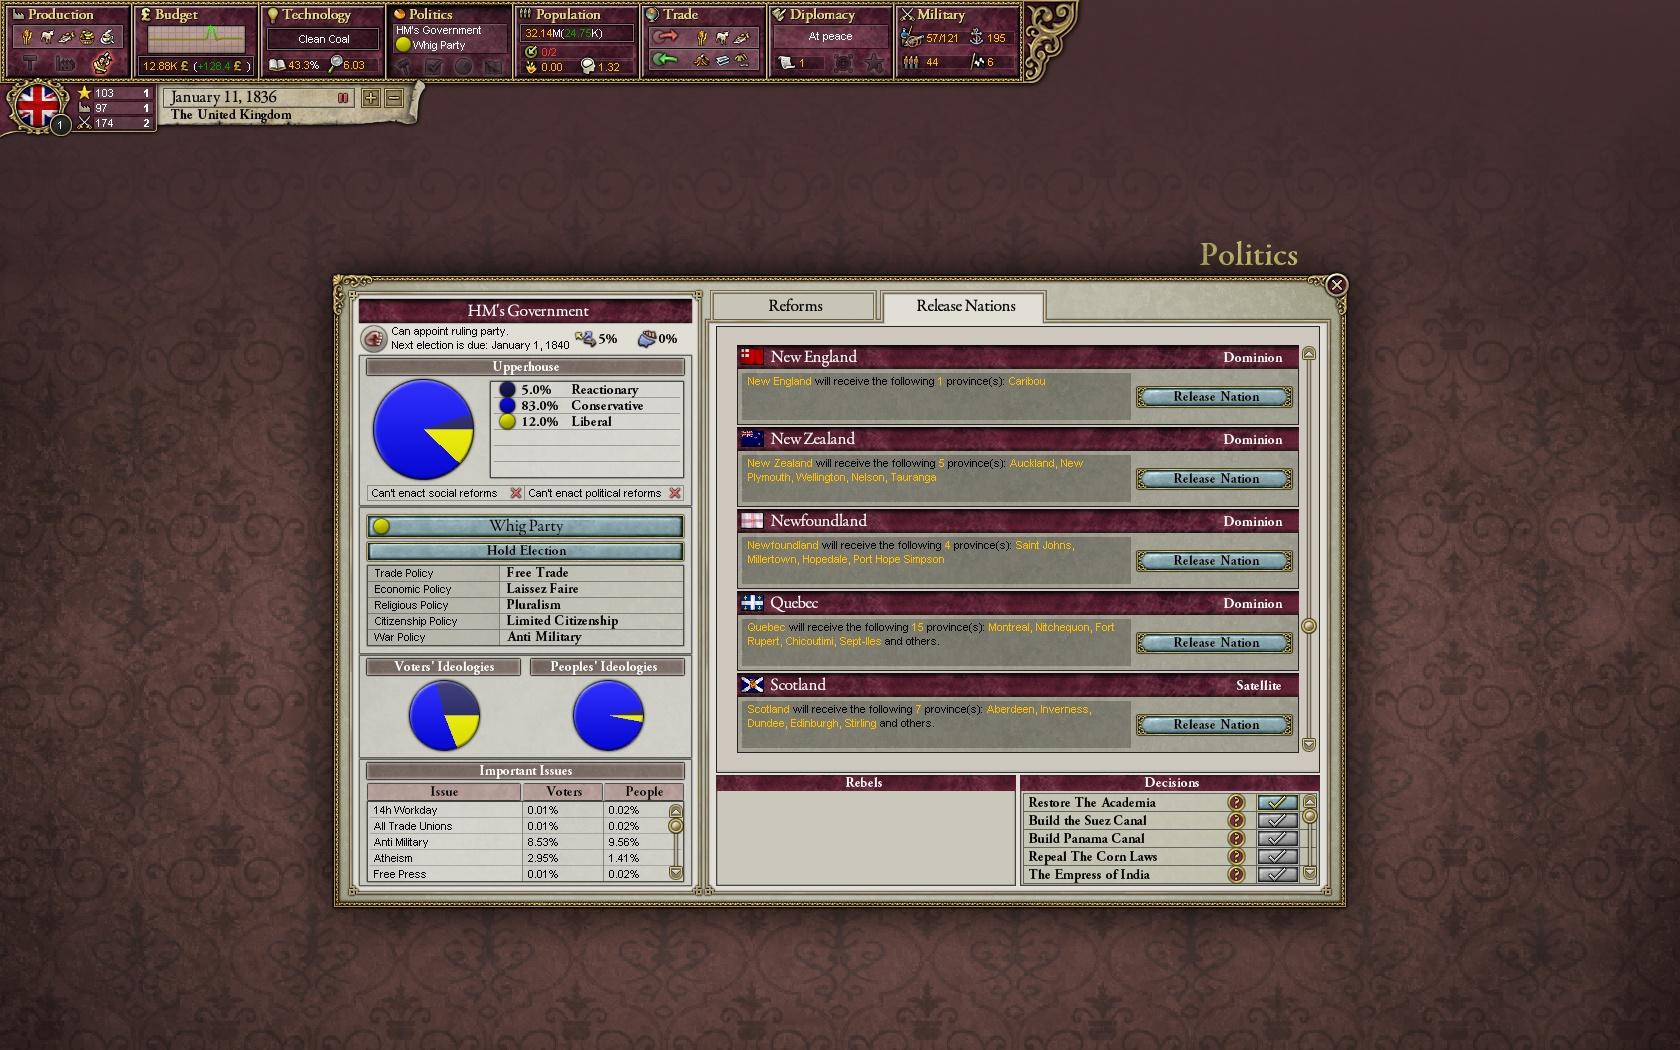 How to install victoria 2 mods on laptop